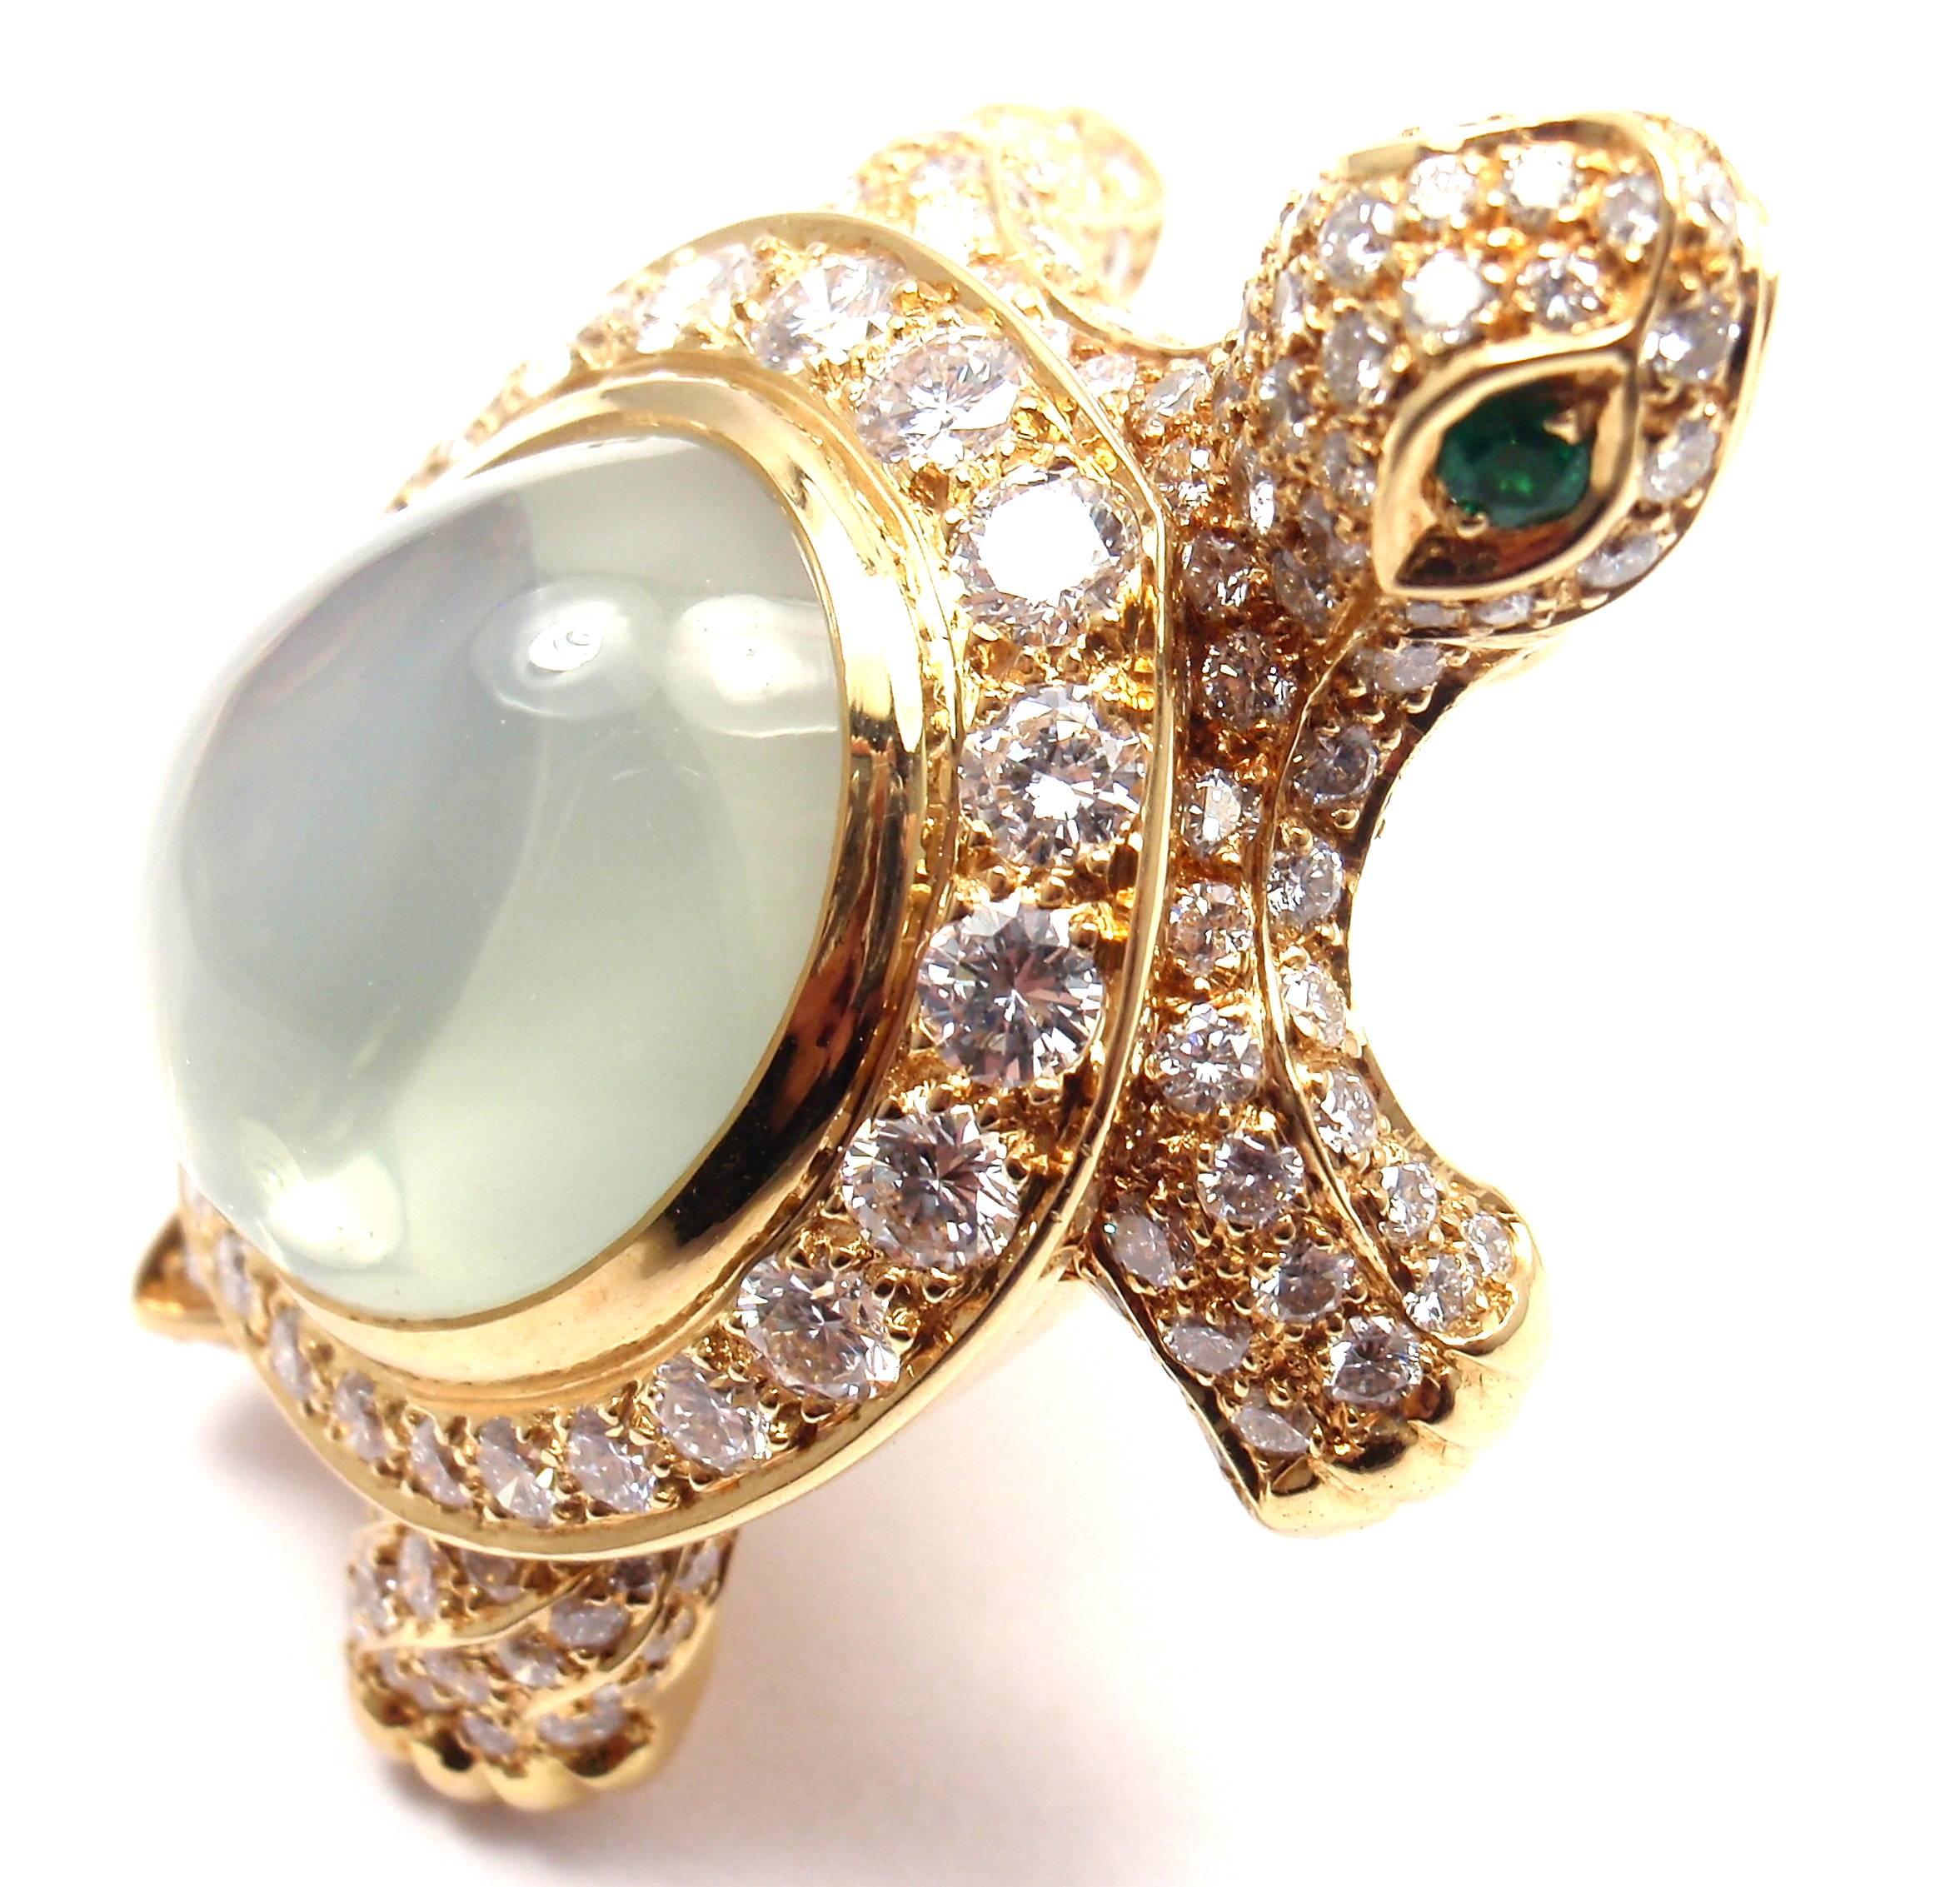 18k Yellow Gold Diamond, Moonstone and Emerald Turtle Pin Brooch by Cartier. This brooch comes with an original Cartier box.
With 140 round brilliant cut diamonds VVS1 clarity, E color total weight approx. 4.5ct
1 large moonstone 16mm x 13mm
2